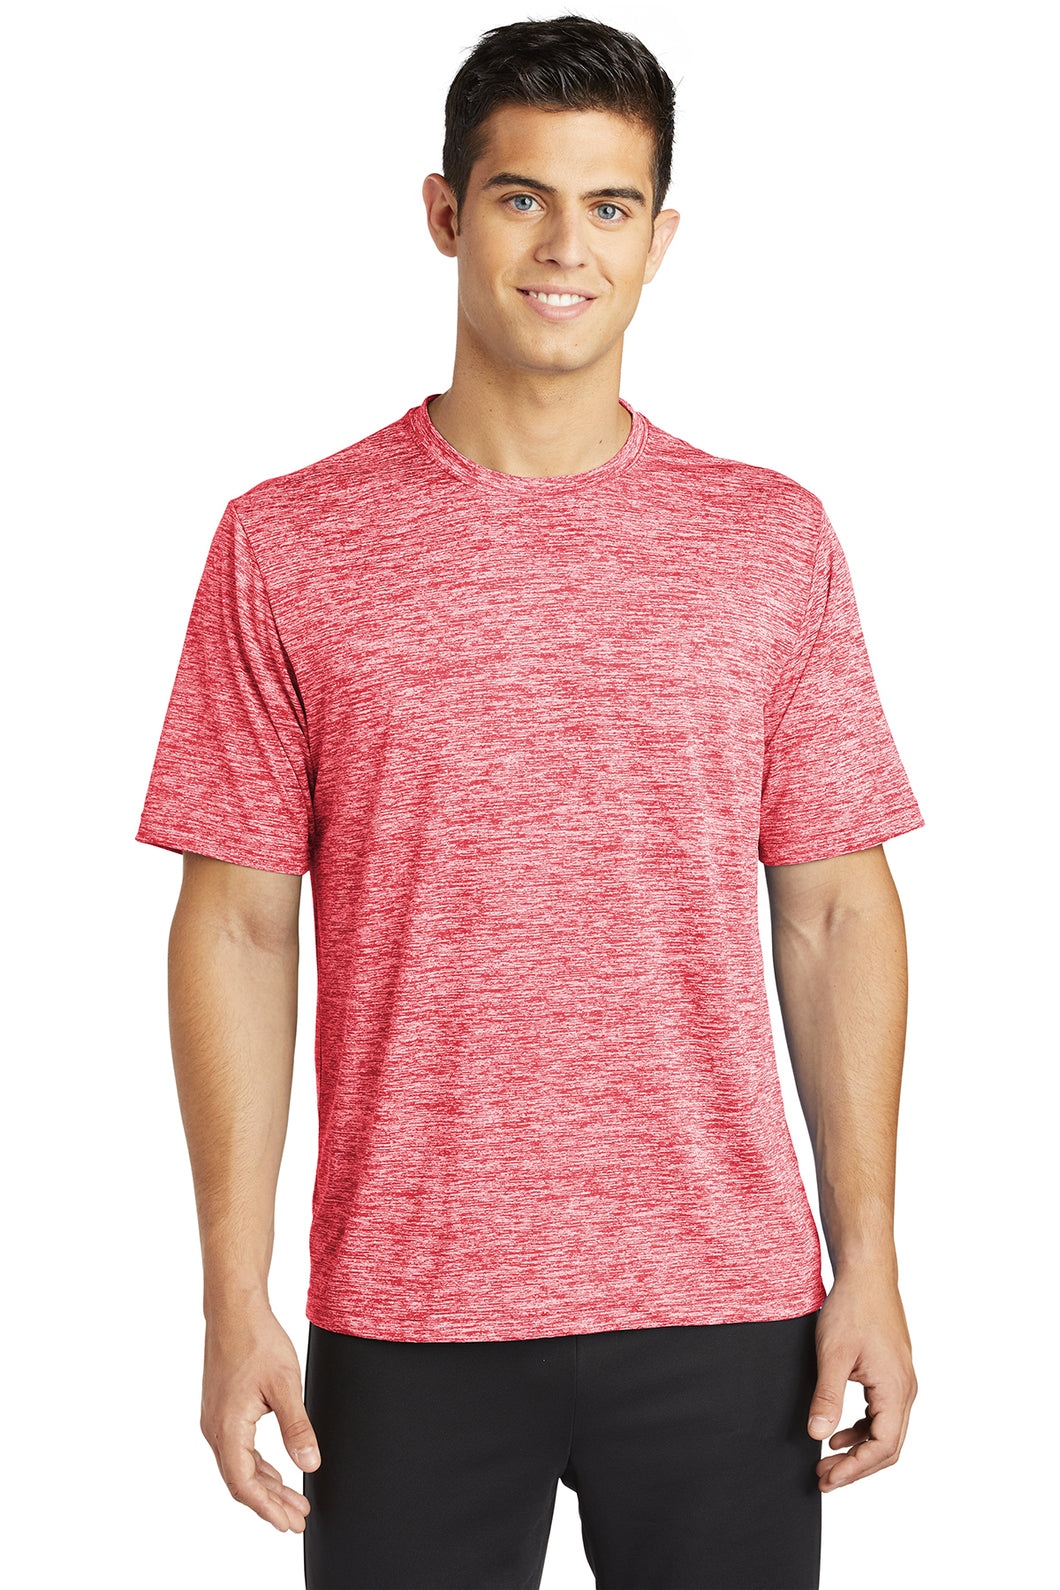 Laser Performance Top - Red